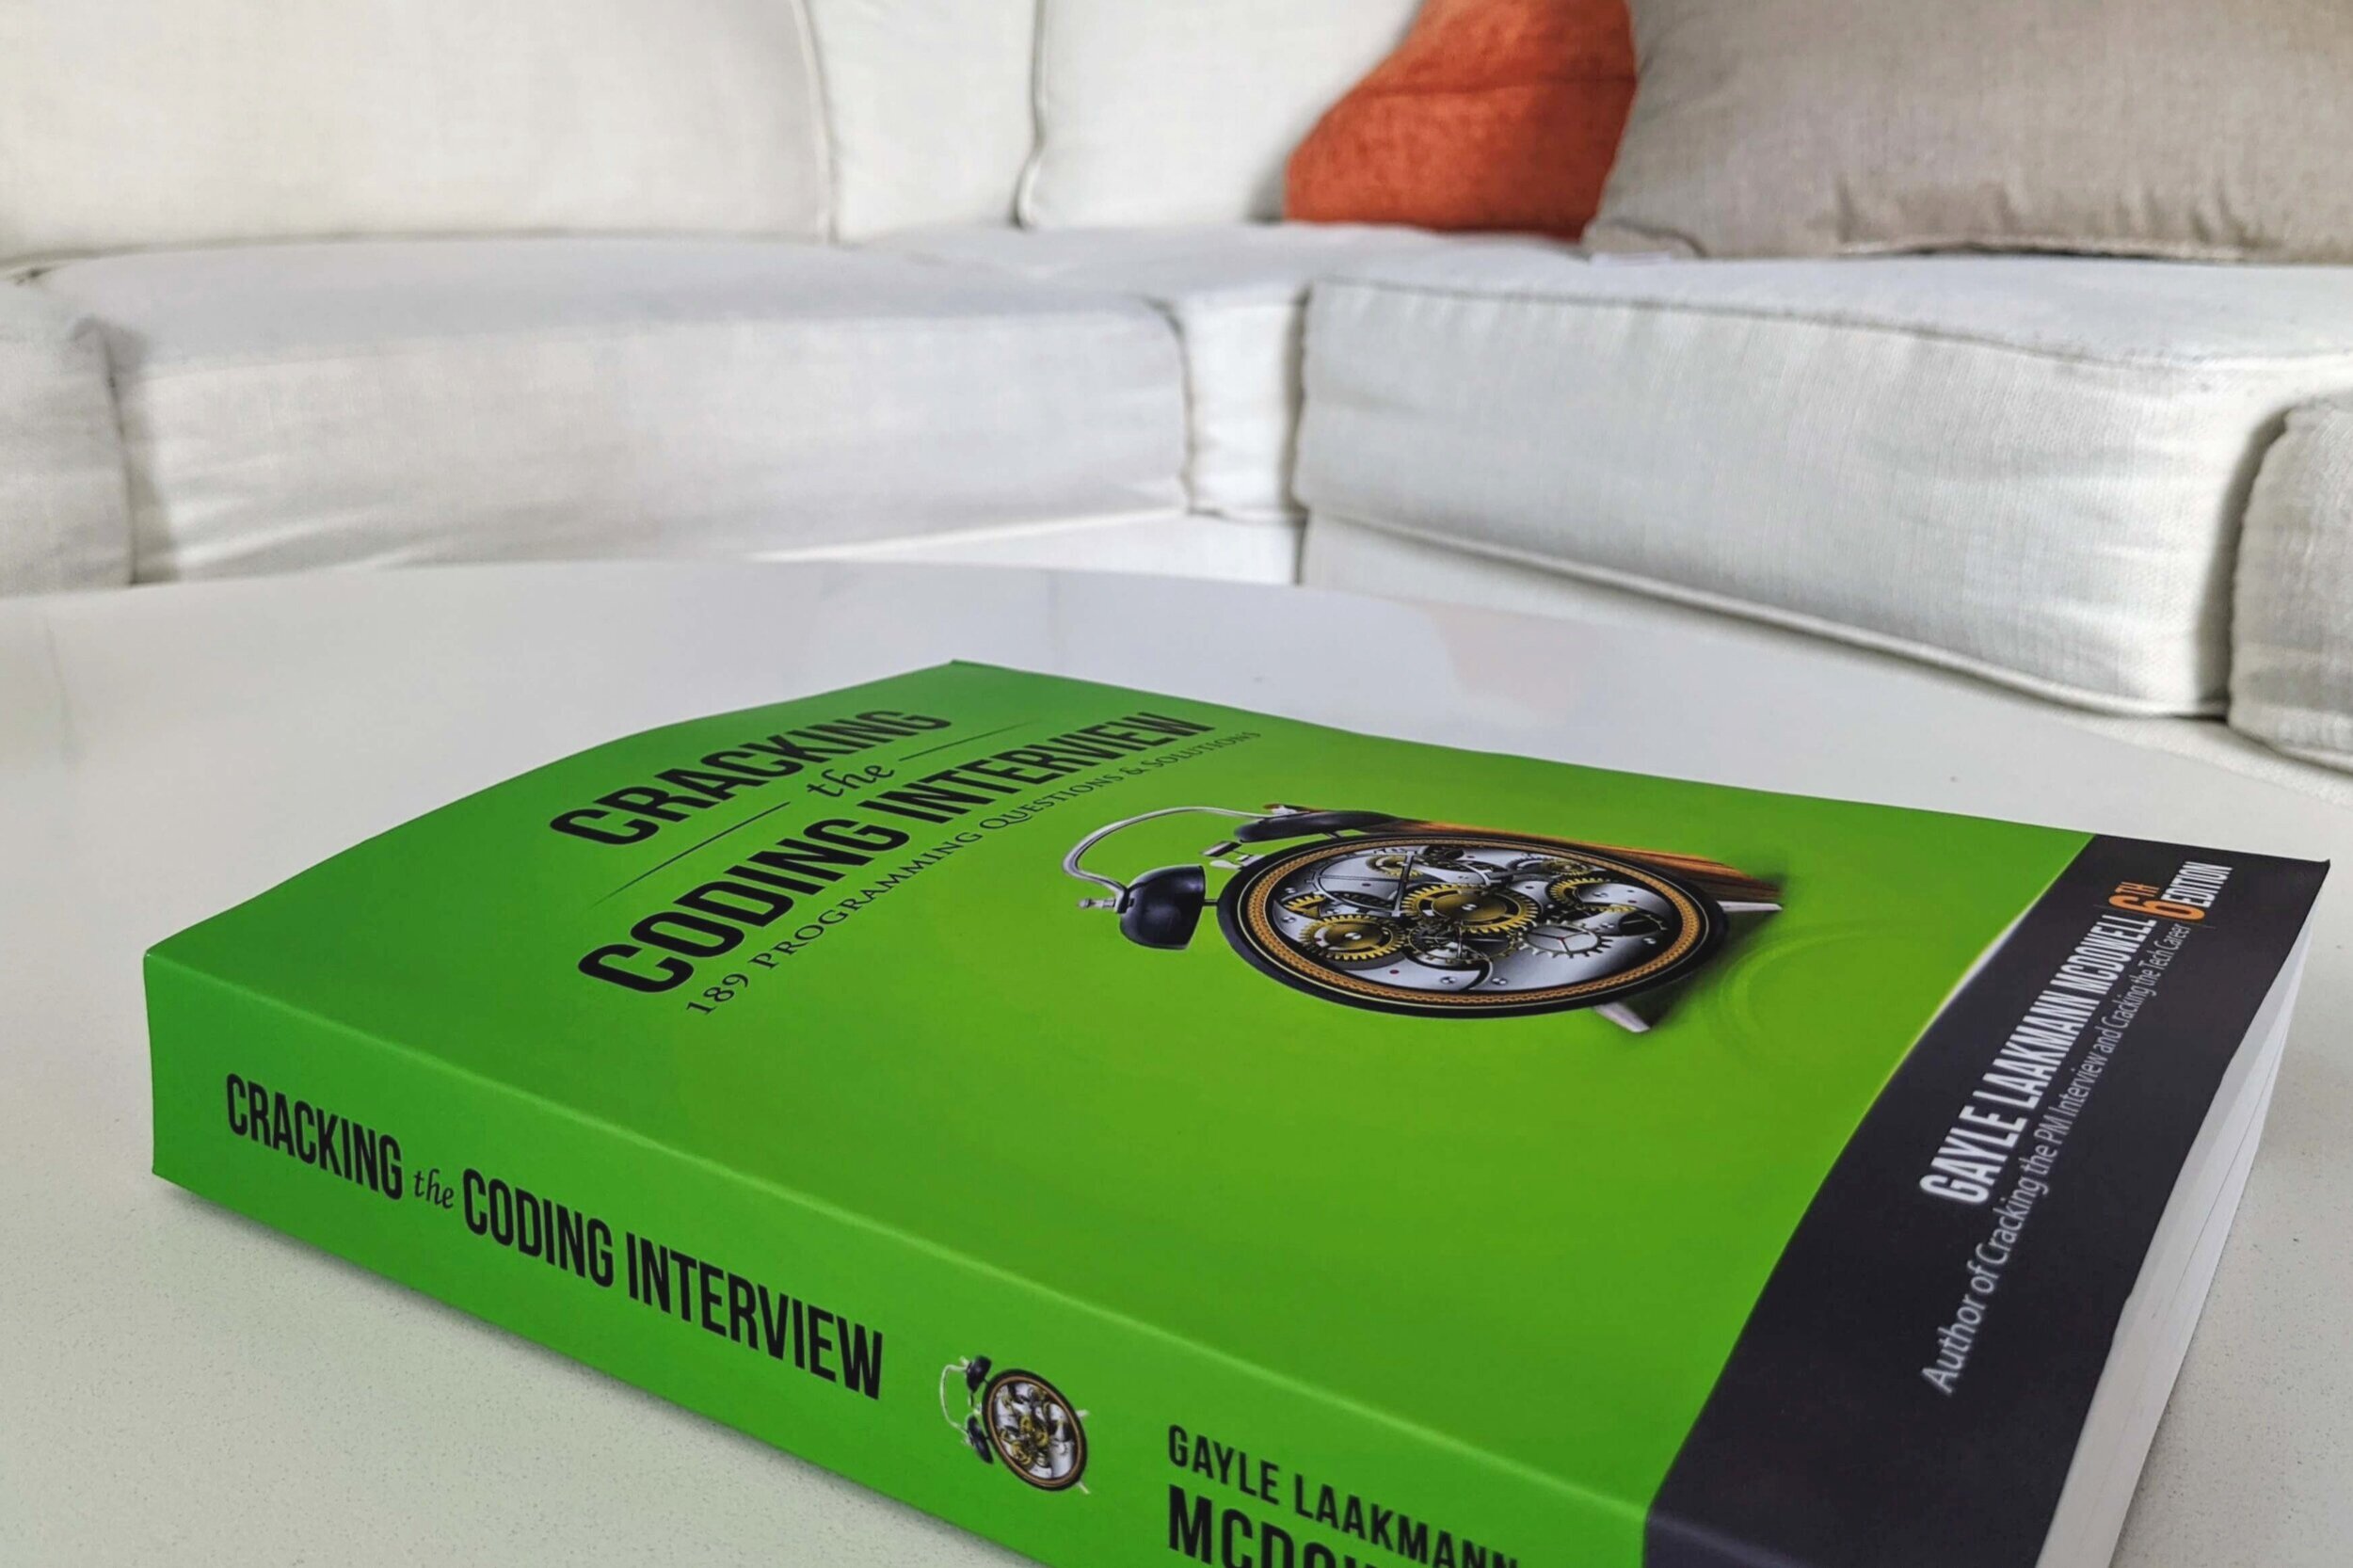 Cracking the Coding Interview is nearly 700 pages of agonizing algorithms problems that take tens or even dozens of hours to study. While I recommend studying this book, it is no picnic.